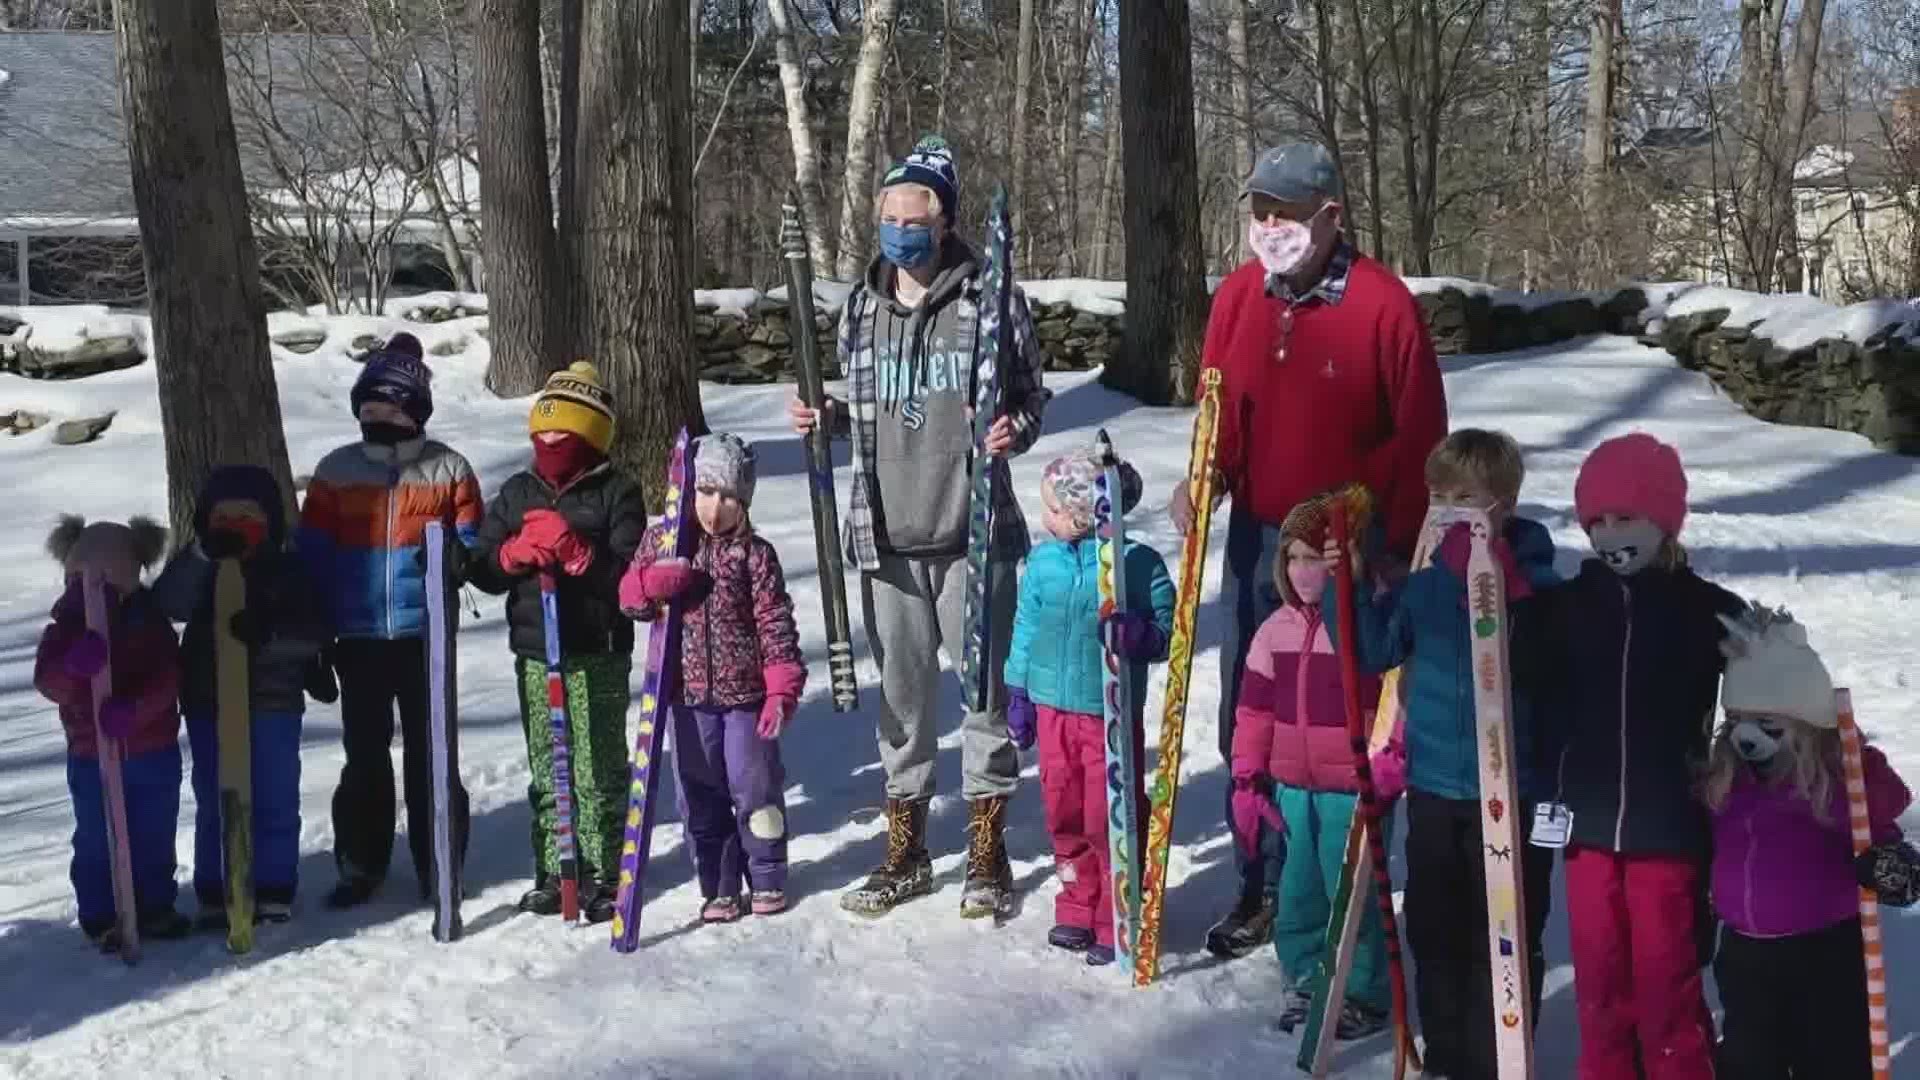 A group in Cape Elizabeth gathers on their street corner for cocktails and snow races.